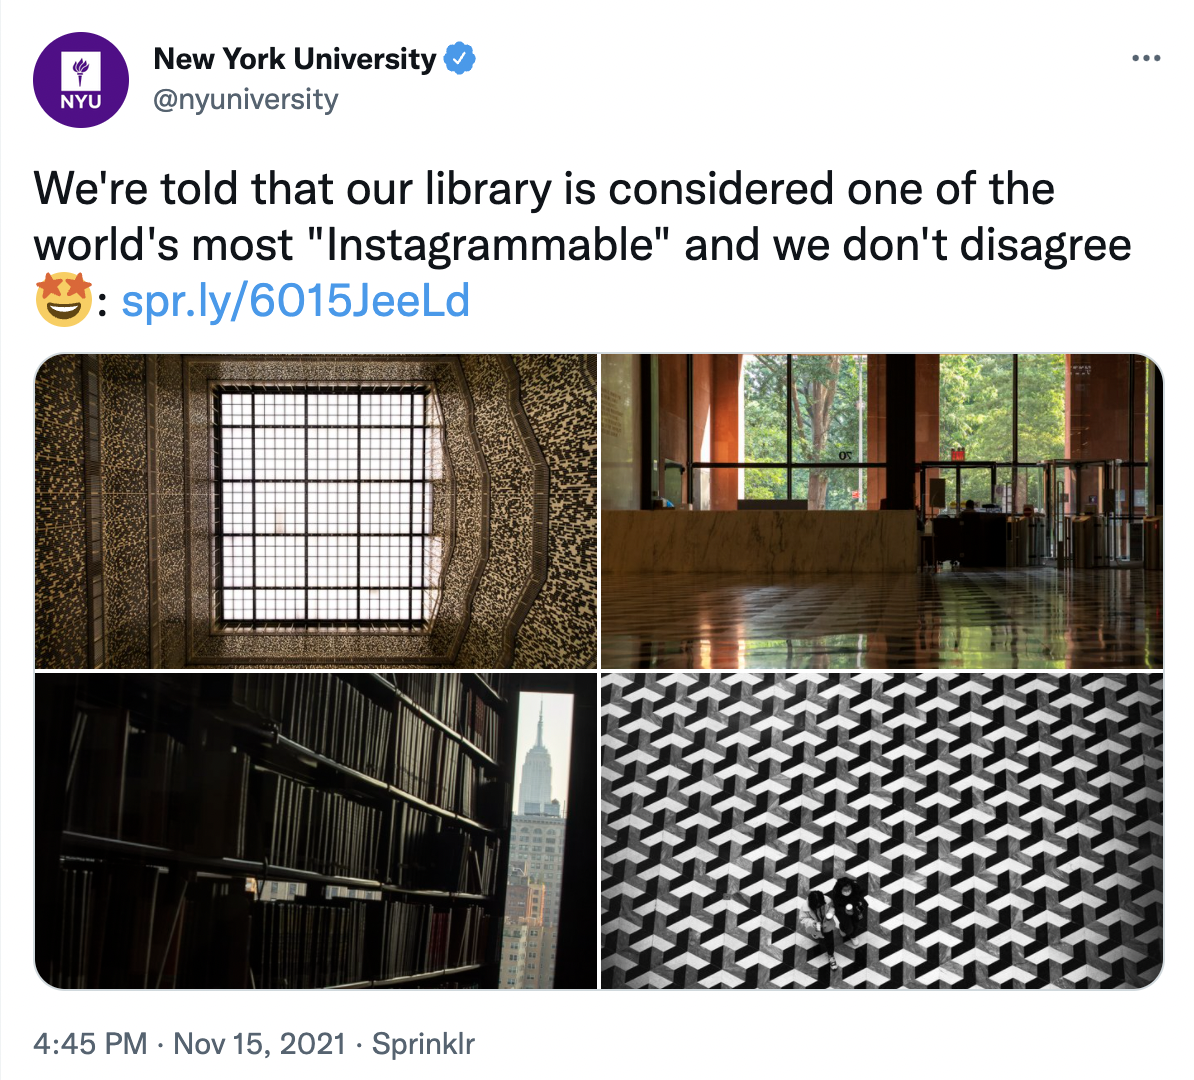 A screenshot of a tweet from NYU. It reads: "We're told that our library is considered one of the world's most 'Instagrammable' and we don't disagree." Four pictures of the interior of Bobst Library are attached; the first shows the gold metallic screens in the atrium.